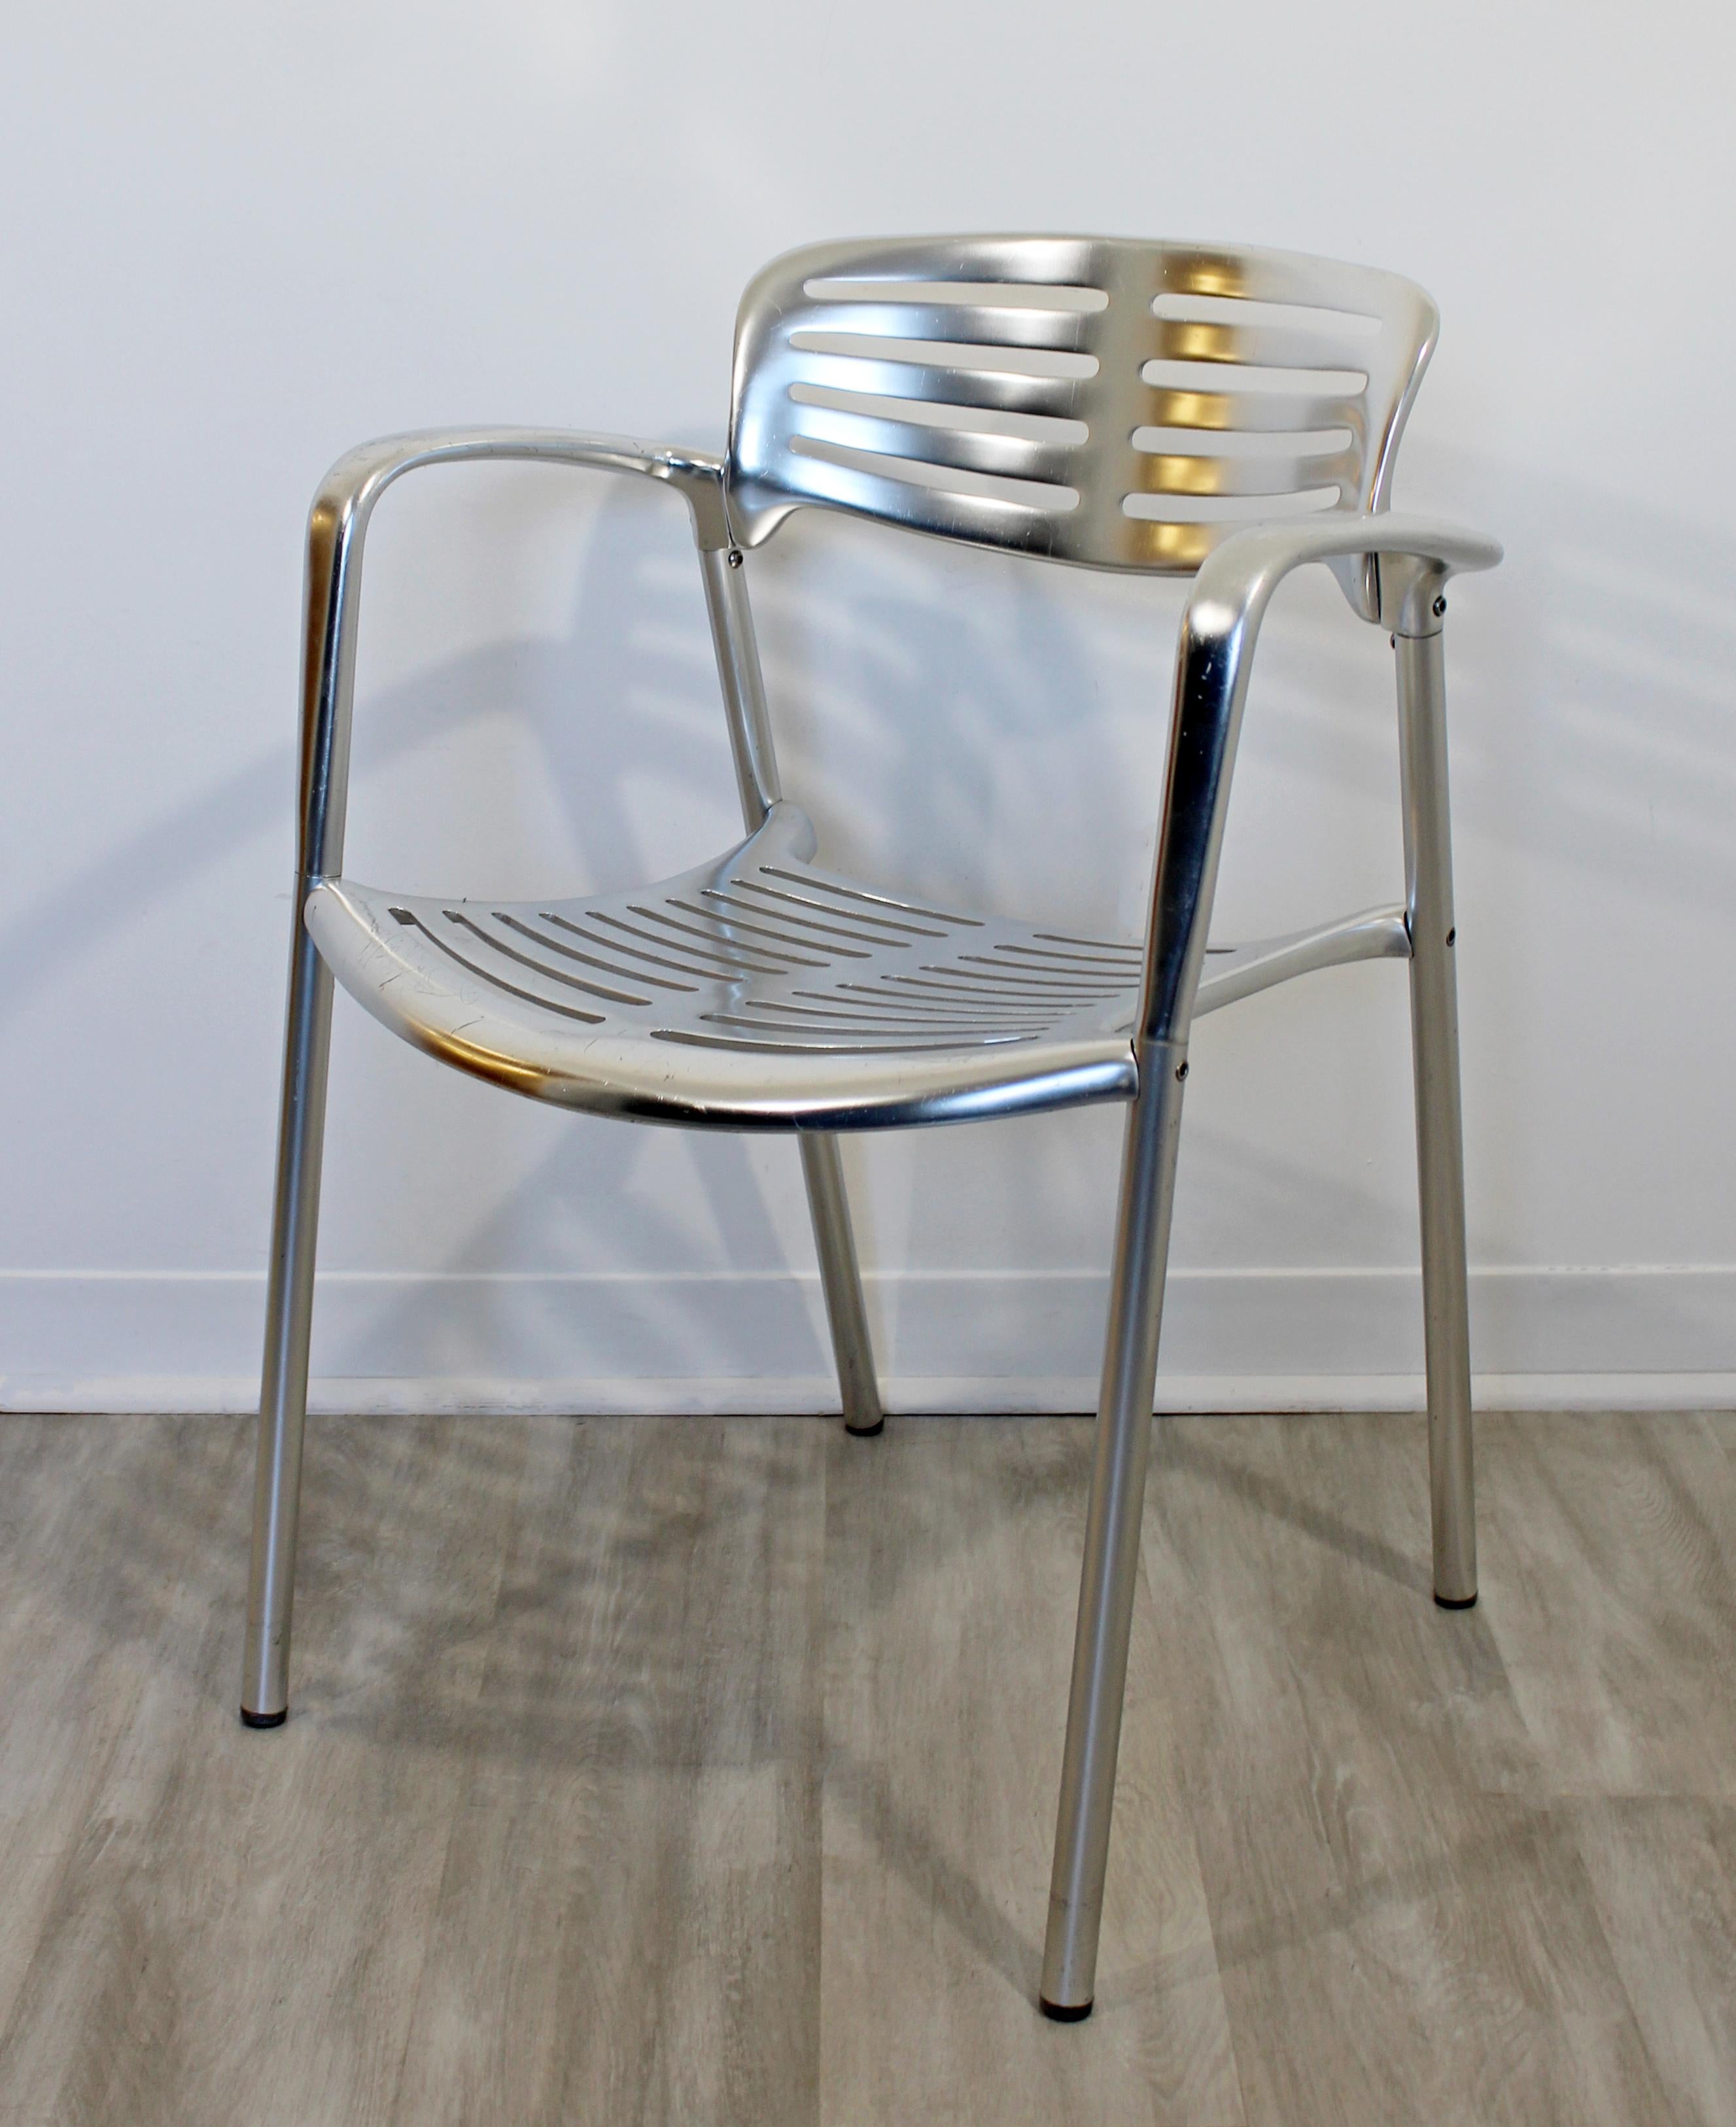 Spanish Contemporary Modernist Aluminum Pair of Chairs Toledo by Jorge Pensi Spain 1980s